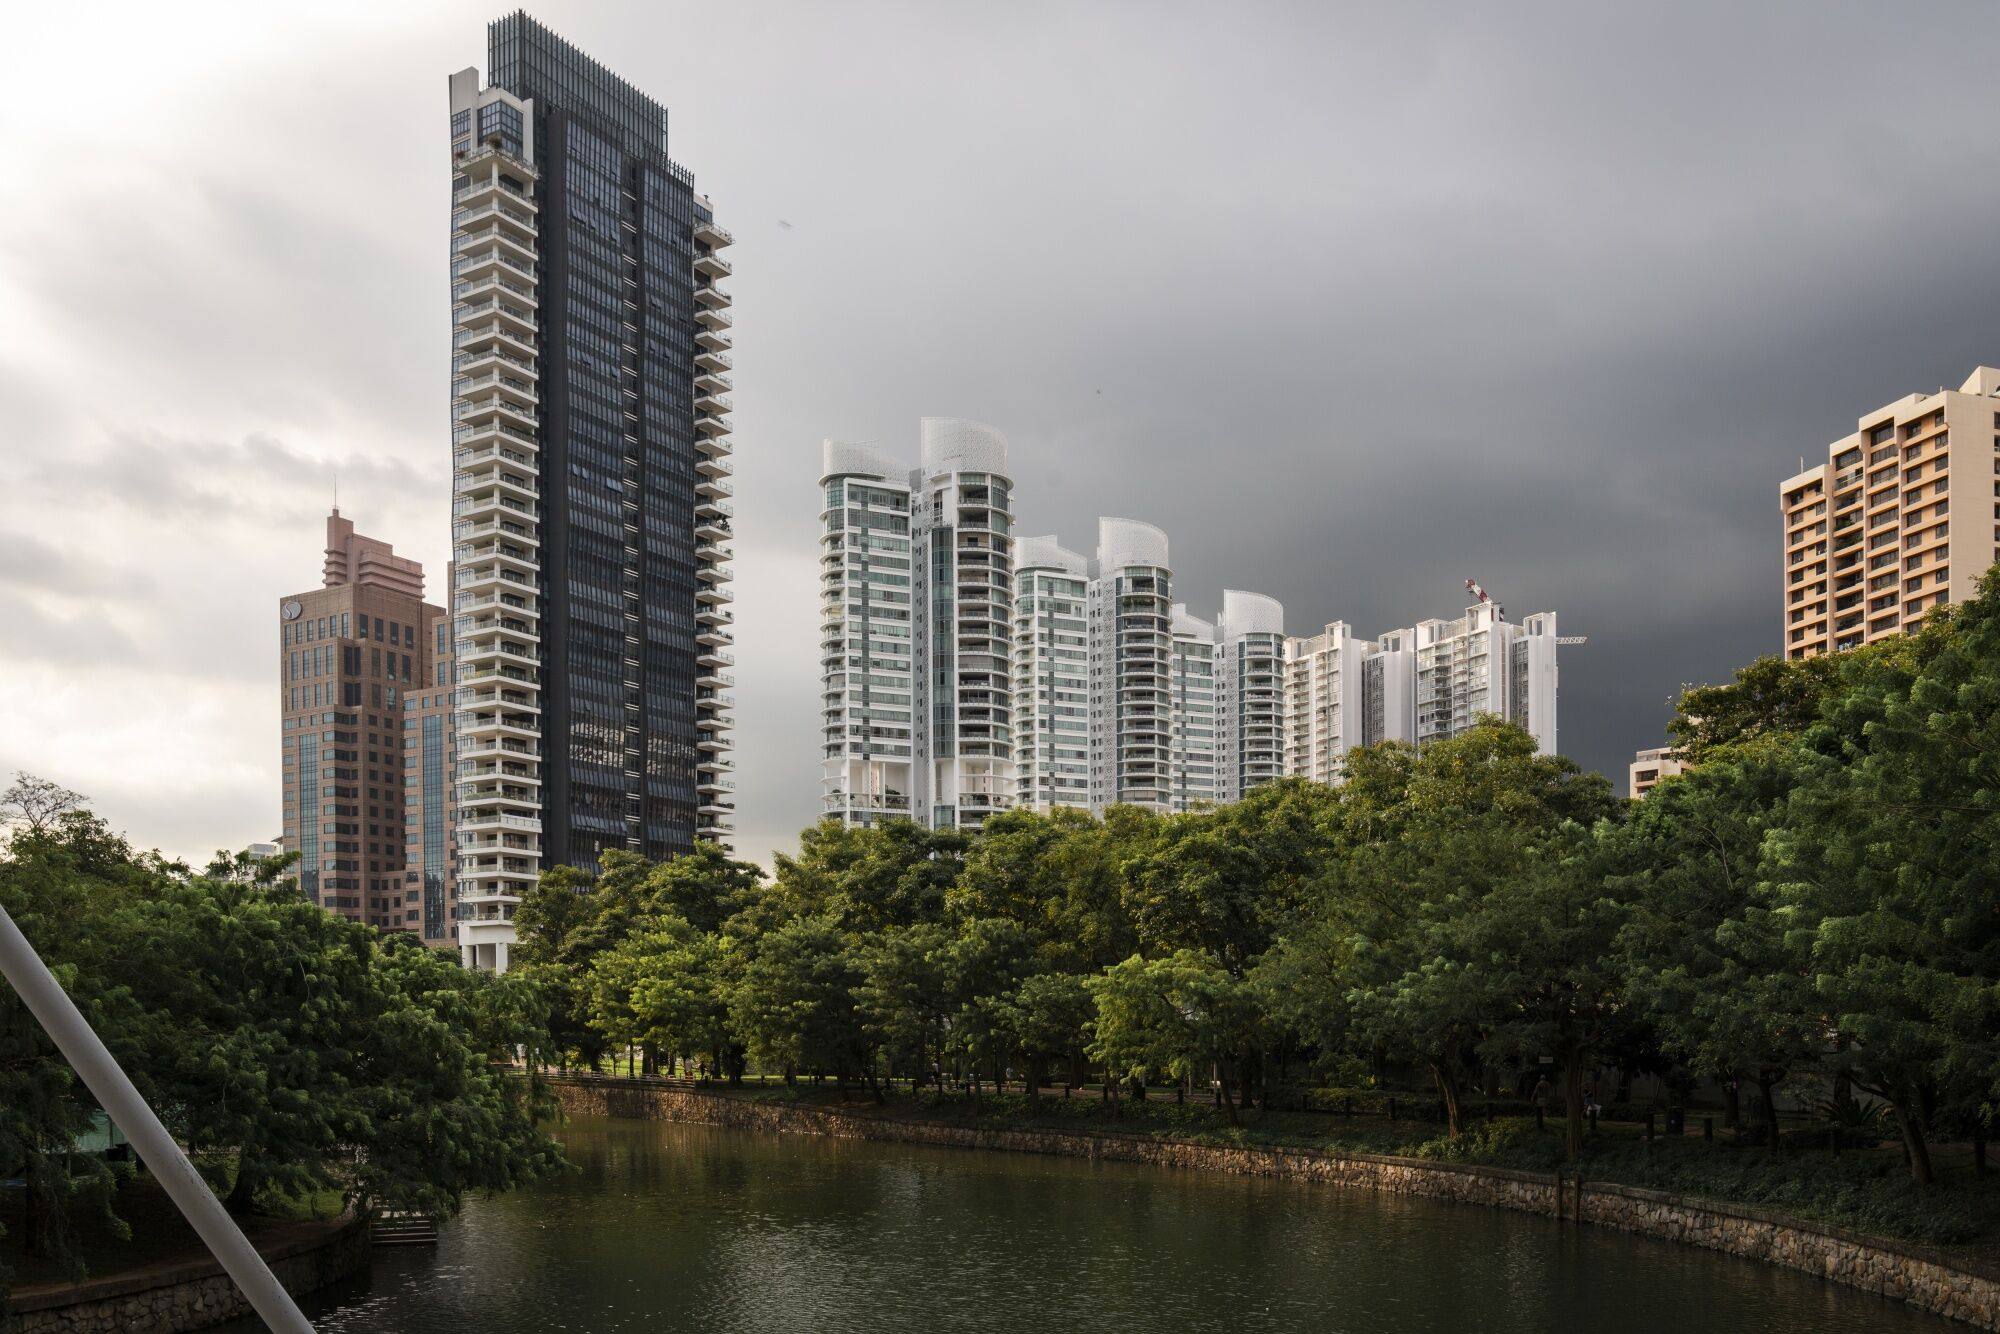 Singapore is offering one-time rebate of up to 100% for owners to offset a rise in property tax. Photo: Bloomberg